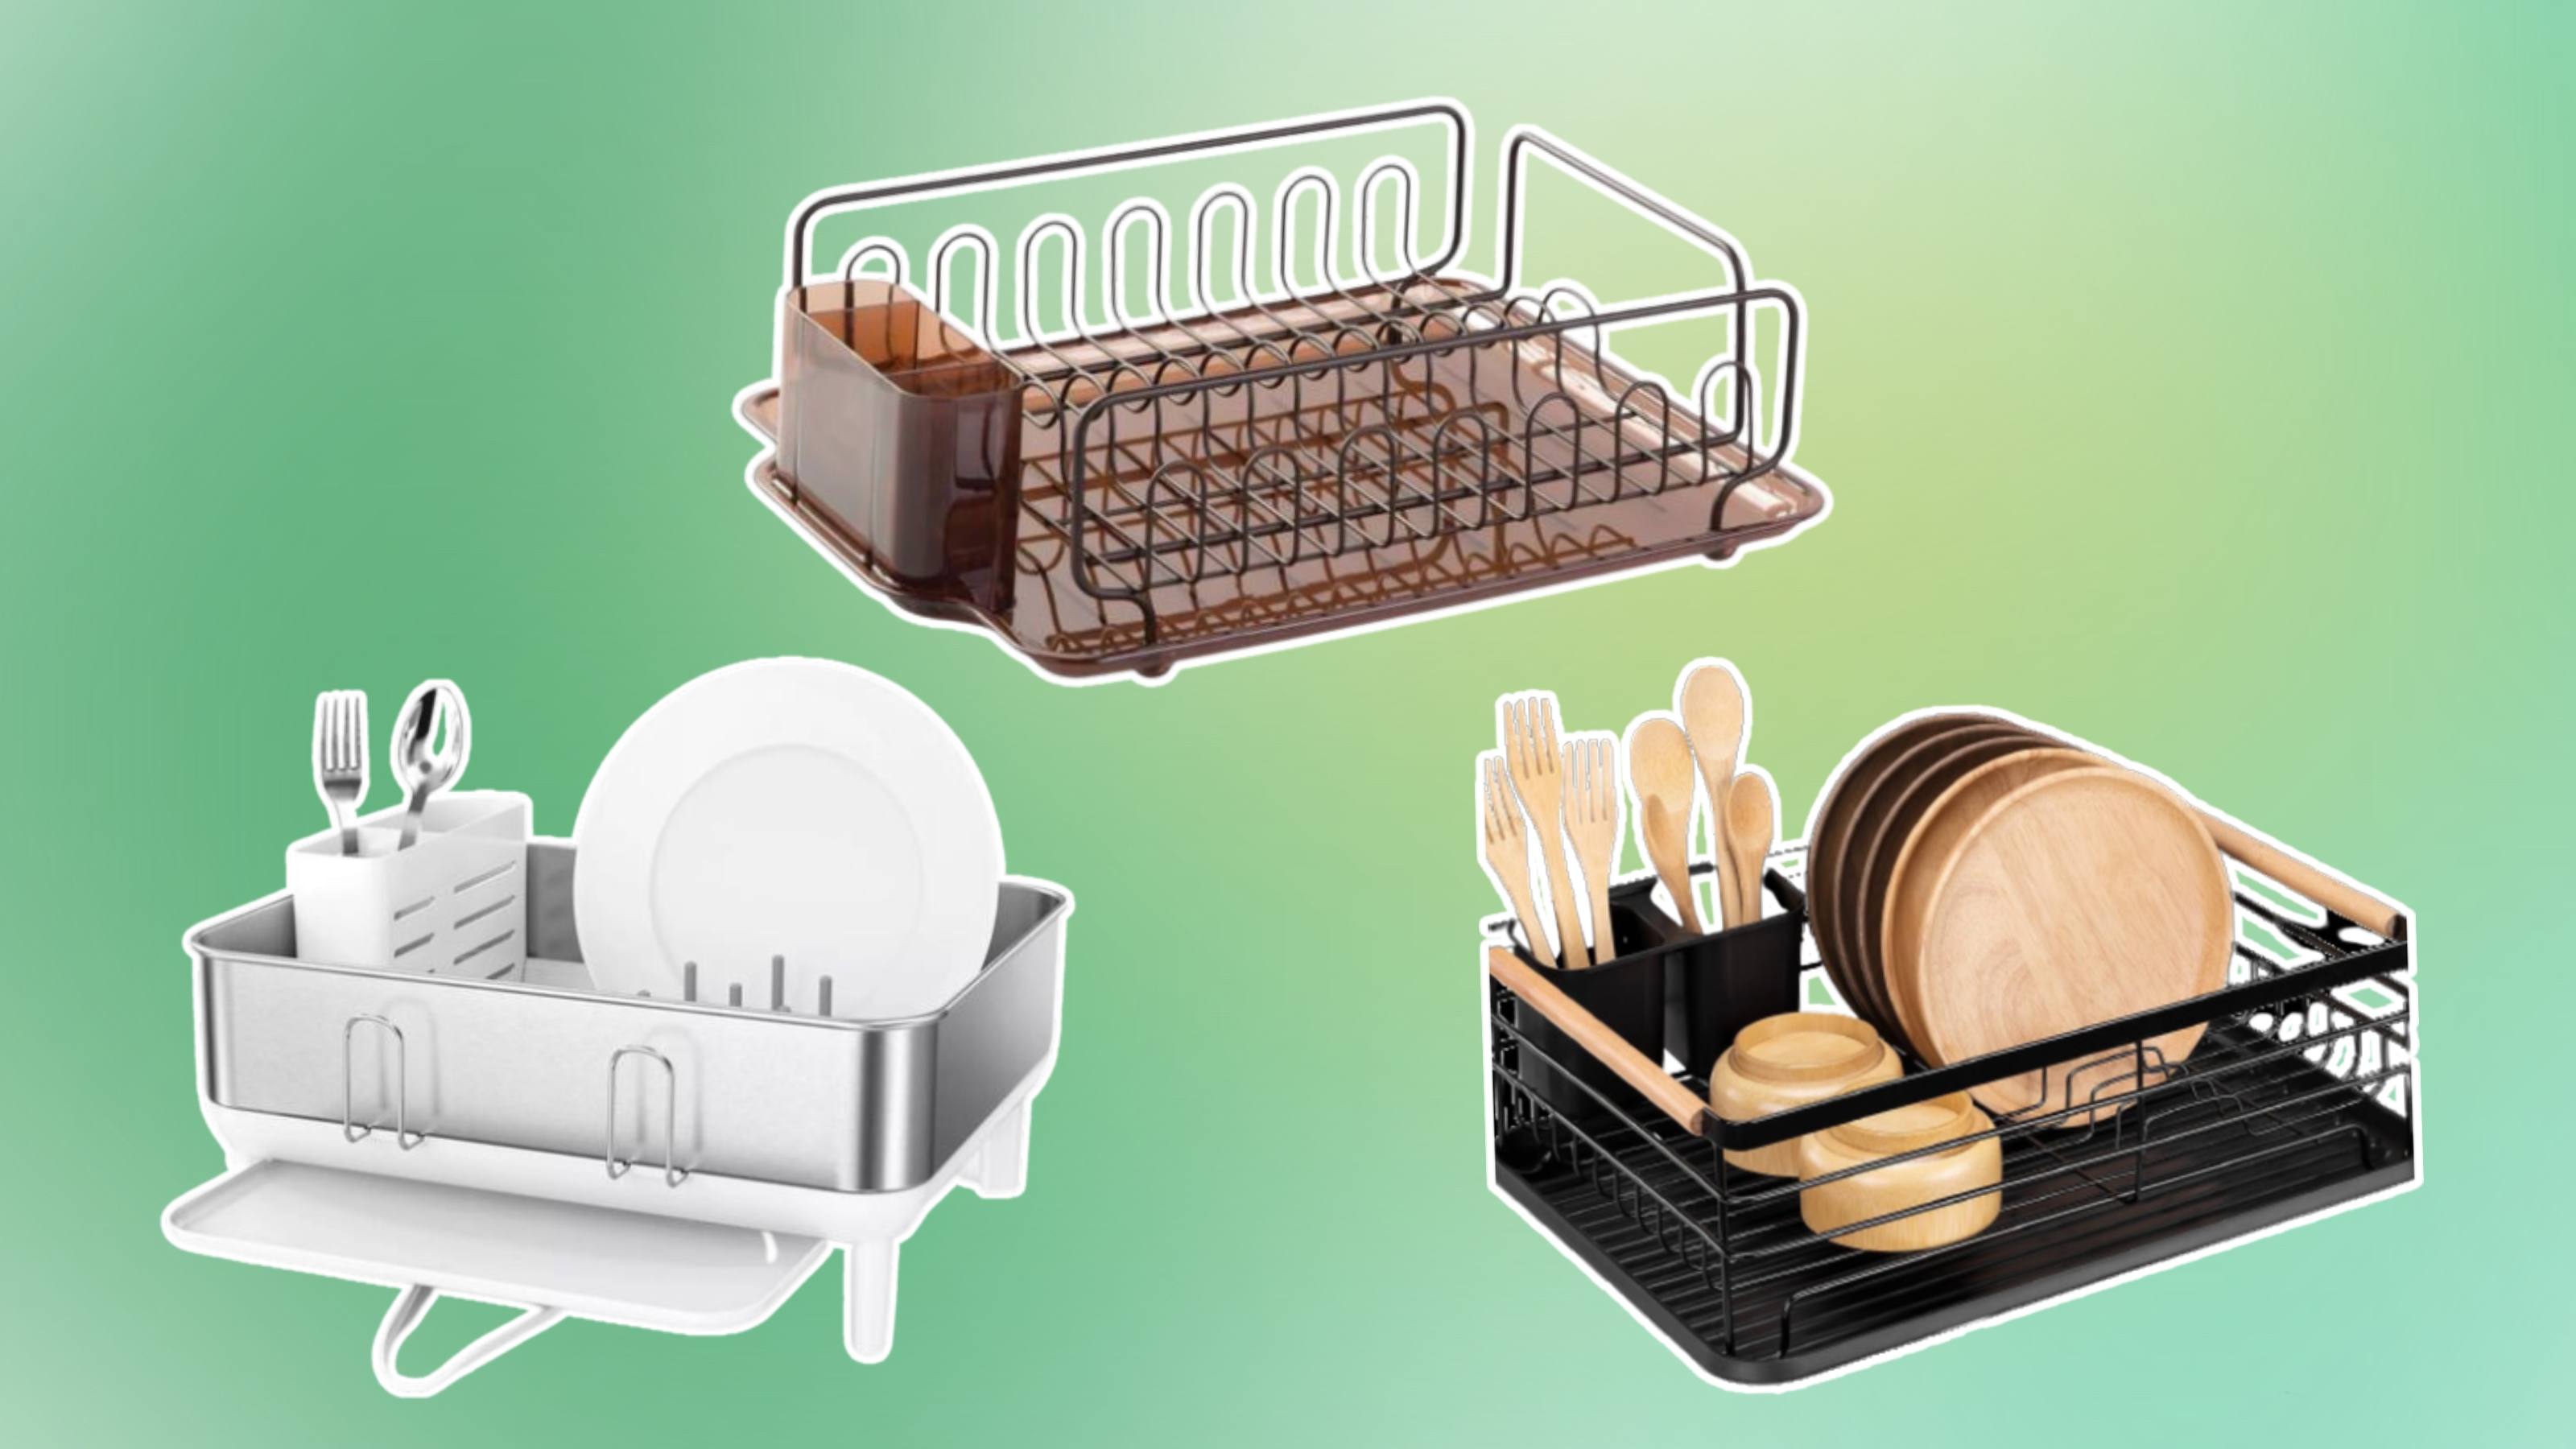 Dish Drying Rack, iSPECLE Dish Drainer with Tray Utensil Cup, for